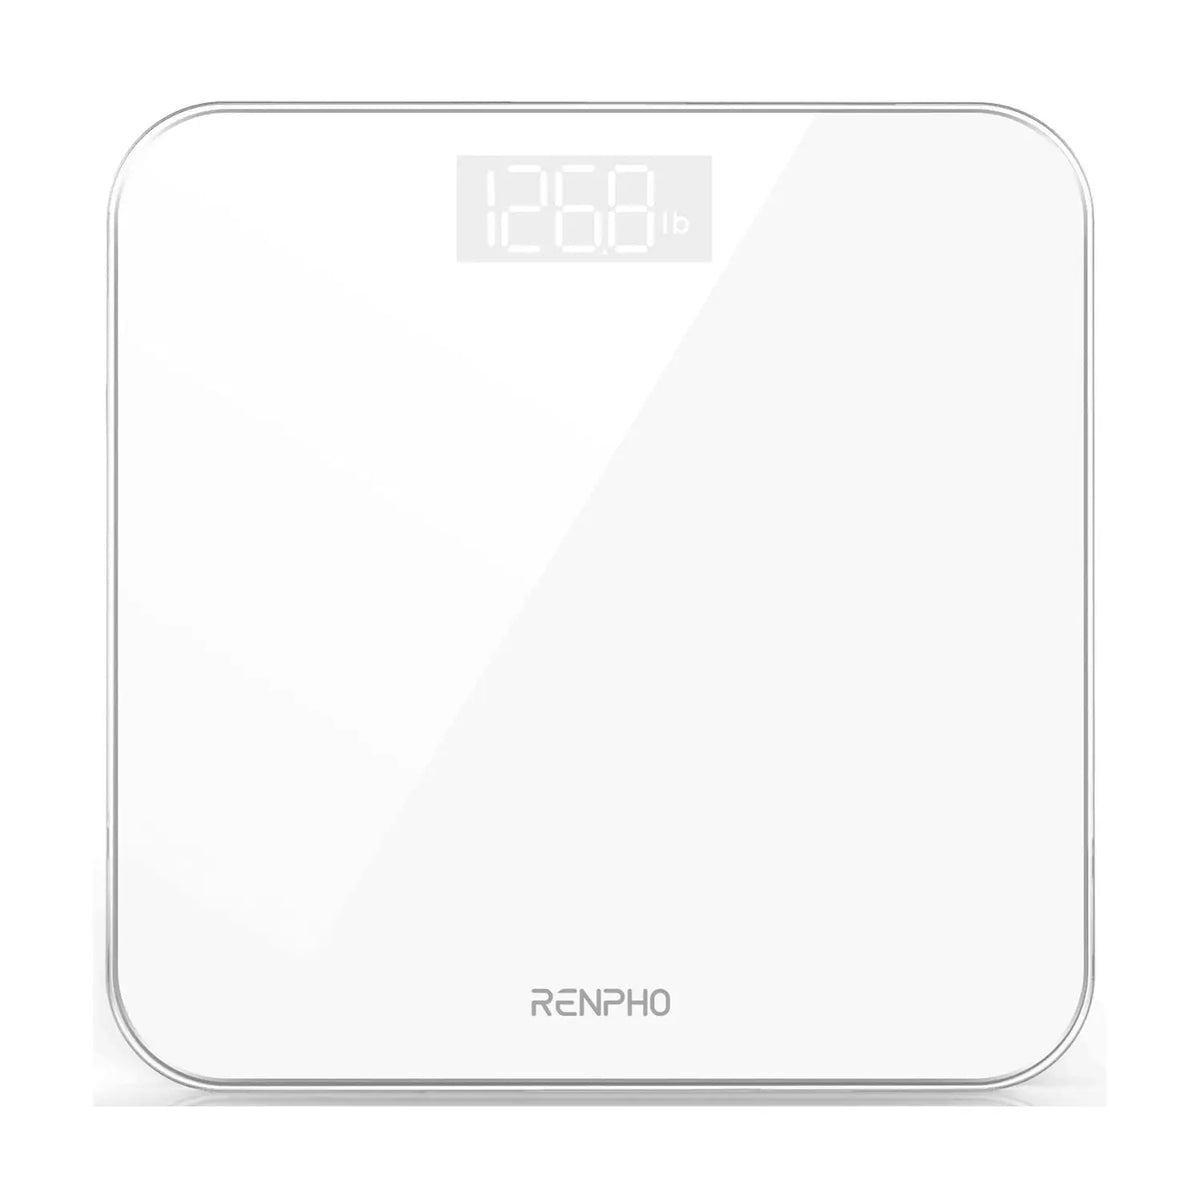 A sleek, modern Renpho EU Core 1S Bathroom Scale with a white, square-shaped design and rounded corners. The display at the top shows the weight "126.8 lb" in bright, easy-to-read digits. This advanced digital bathroom scale is ideal for precise body measurements, with a smooth and reflective surface.